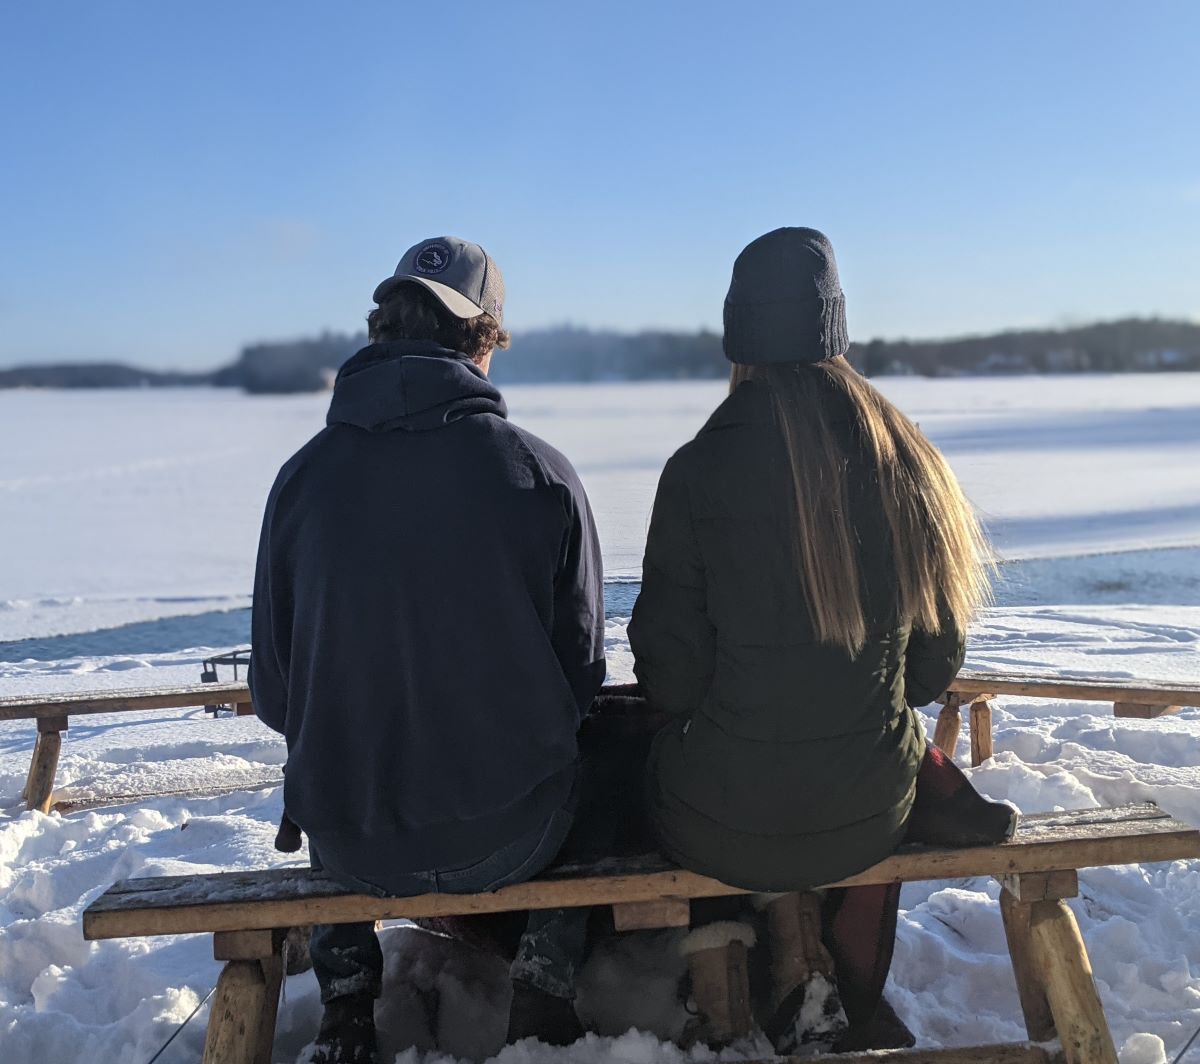 Winter Activities in the Brainerd Lakes Area include sitting by a bonfire by the lake, like this couple